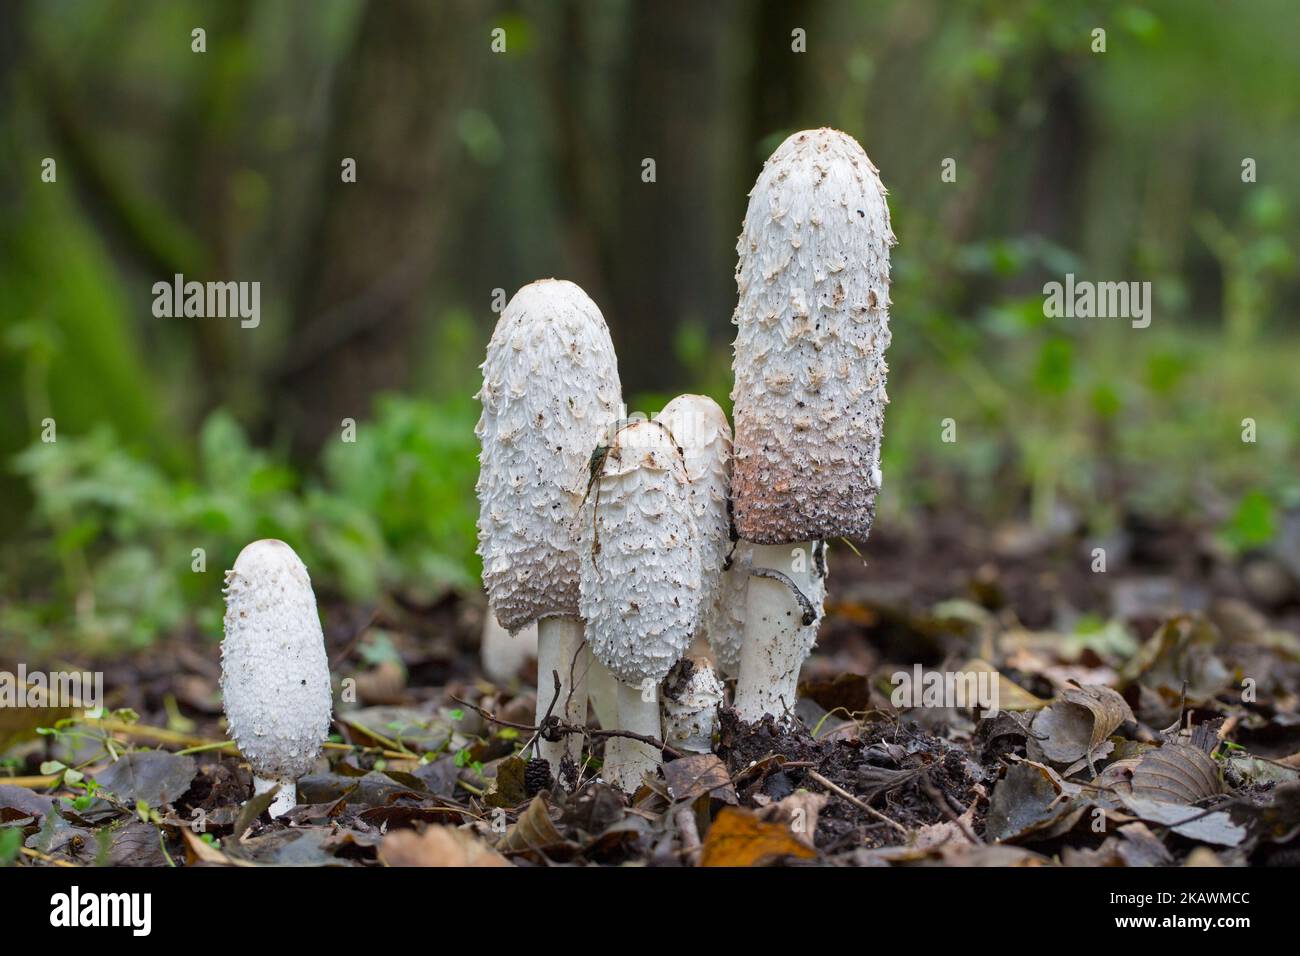 Shaggy ink cap / lawyer's wig / shaggy mane fungus (Coprinus comatus), young fruiting bodies of fungi / mushrooms in forest in autumn / fall Stock Photo